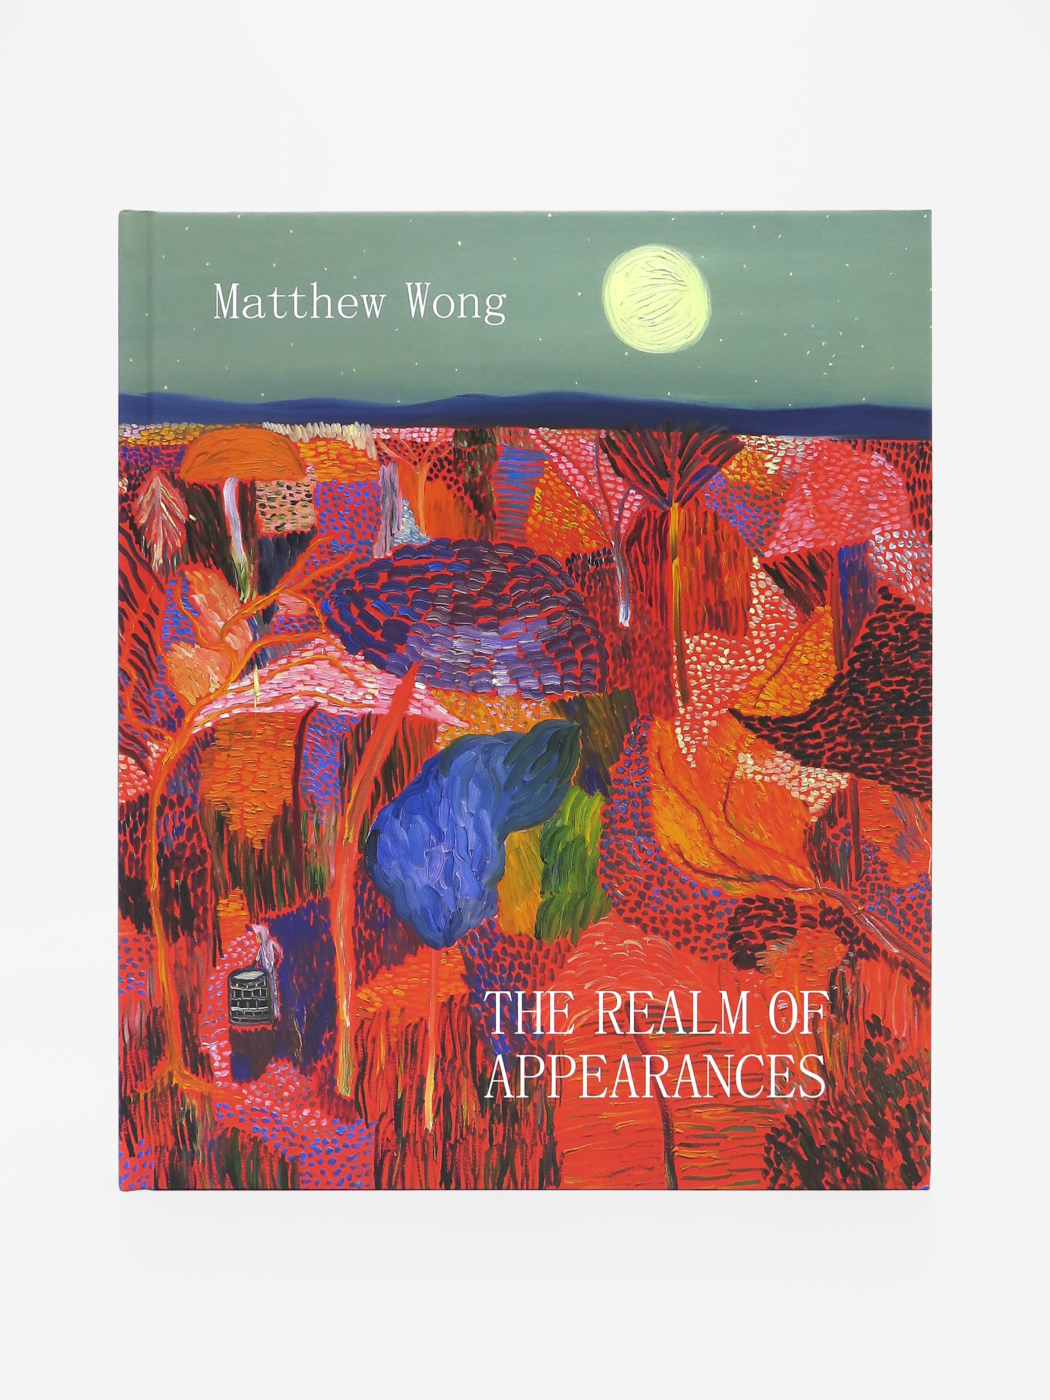 Matthew Wong, The Realm of Appearances